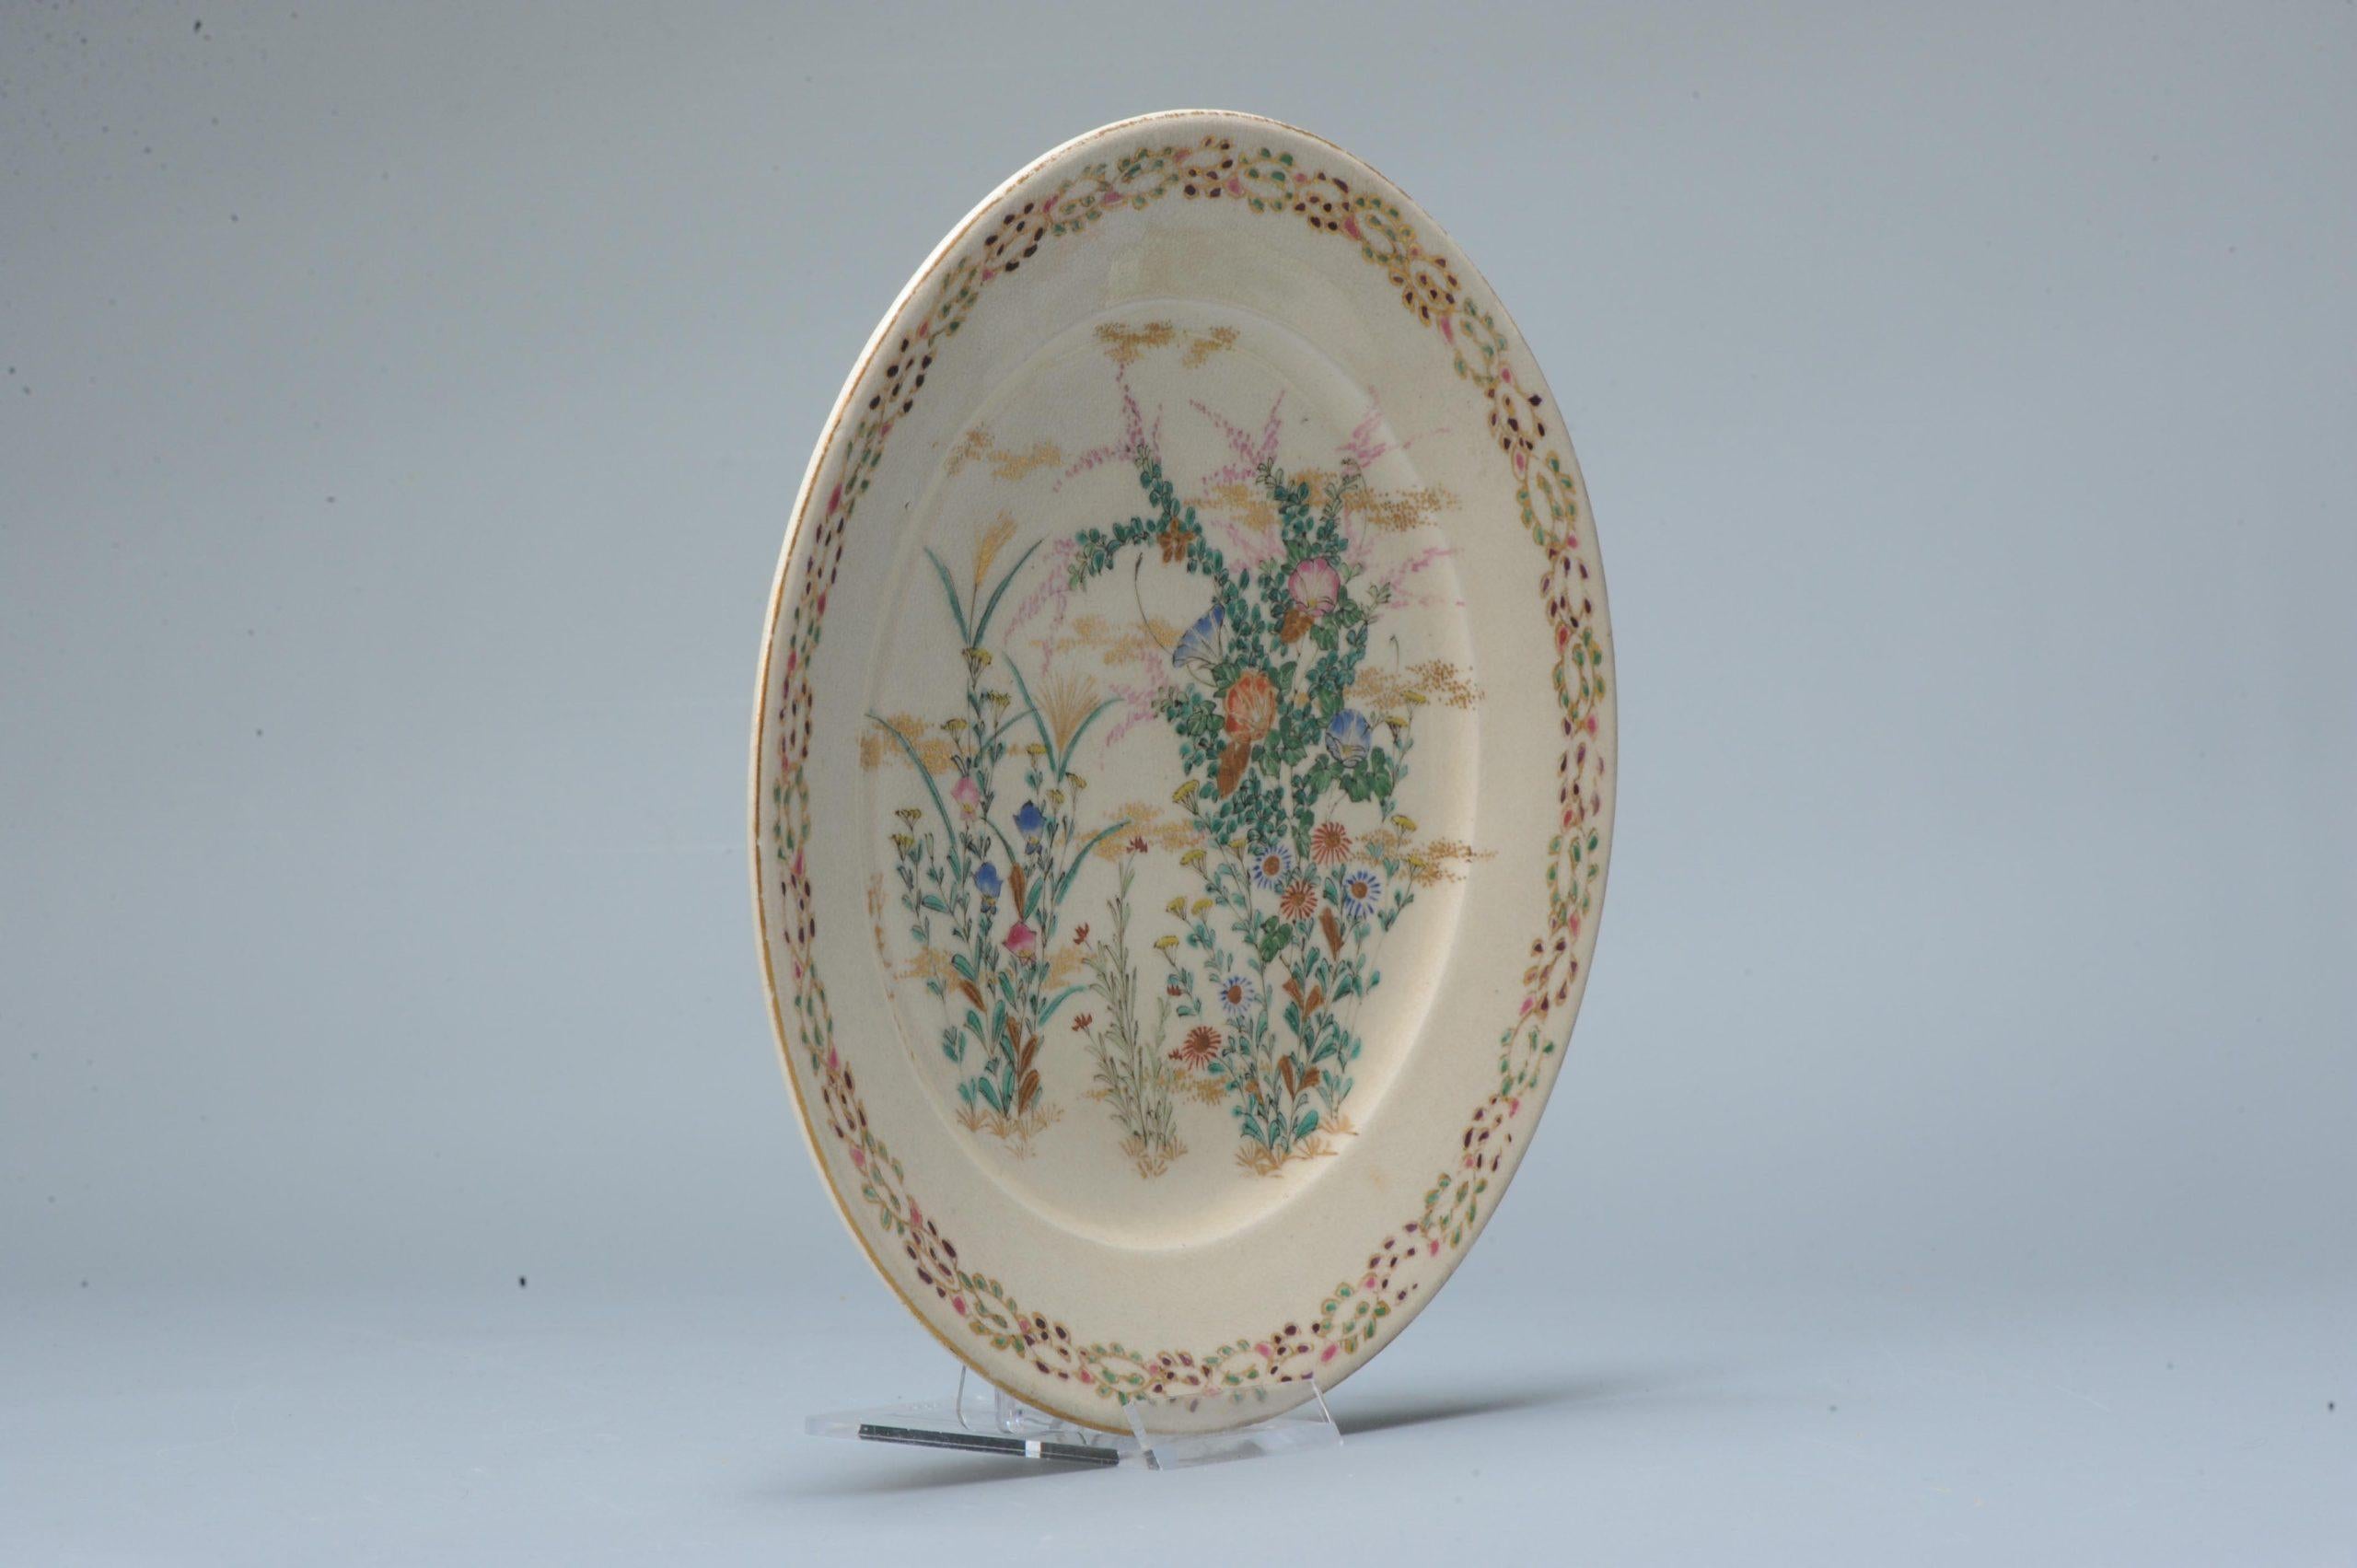 Fabulous Japanese earthenware Satsuma plate with nice decoration of a flowers. Meiji period, 19th c

Lovely piece.

Additional information:
Material: Porcelain & Pottery
Type: Plates
Japanese Style: Satsuma
Region of Origin: Japan
Period: 19th